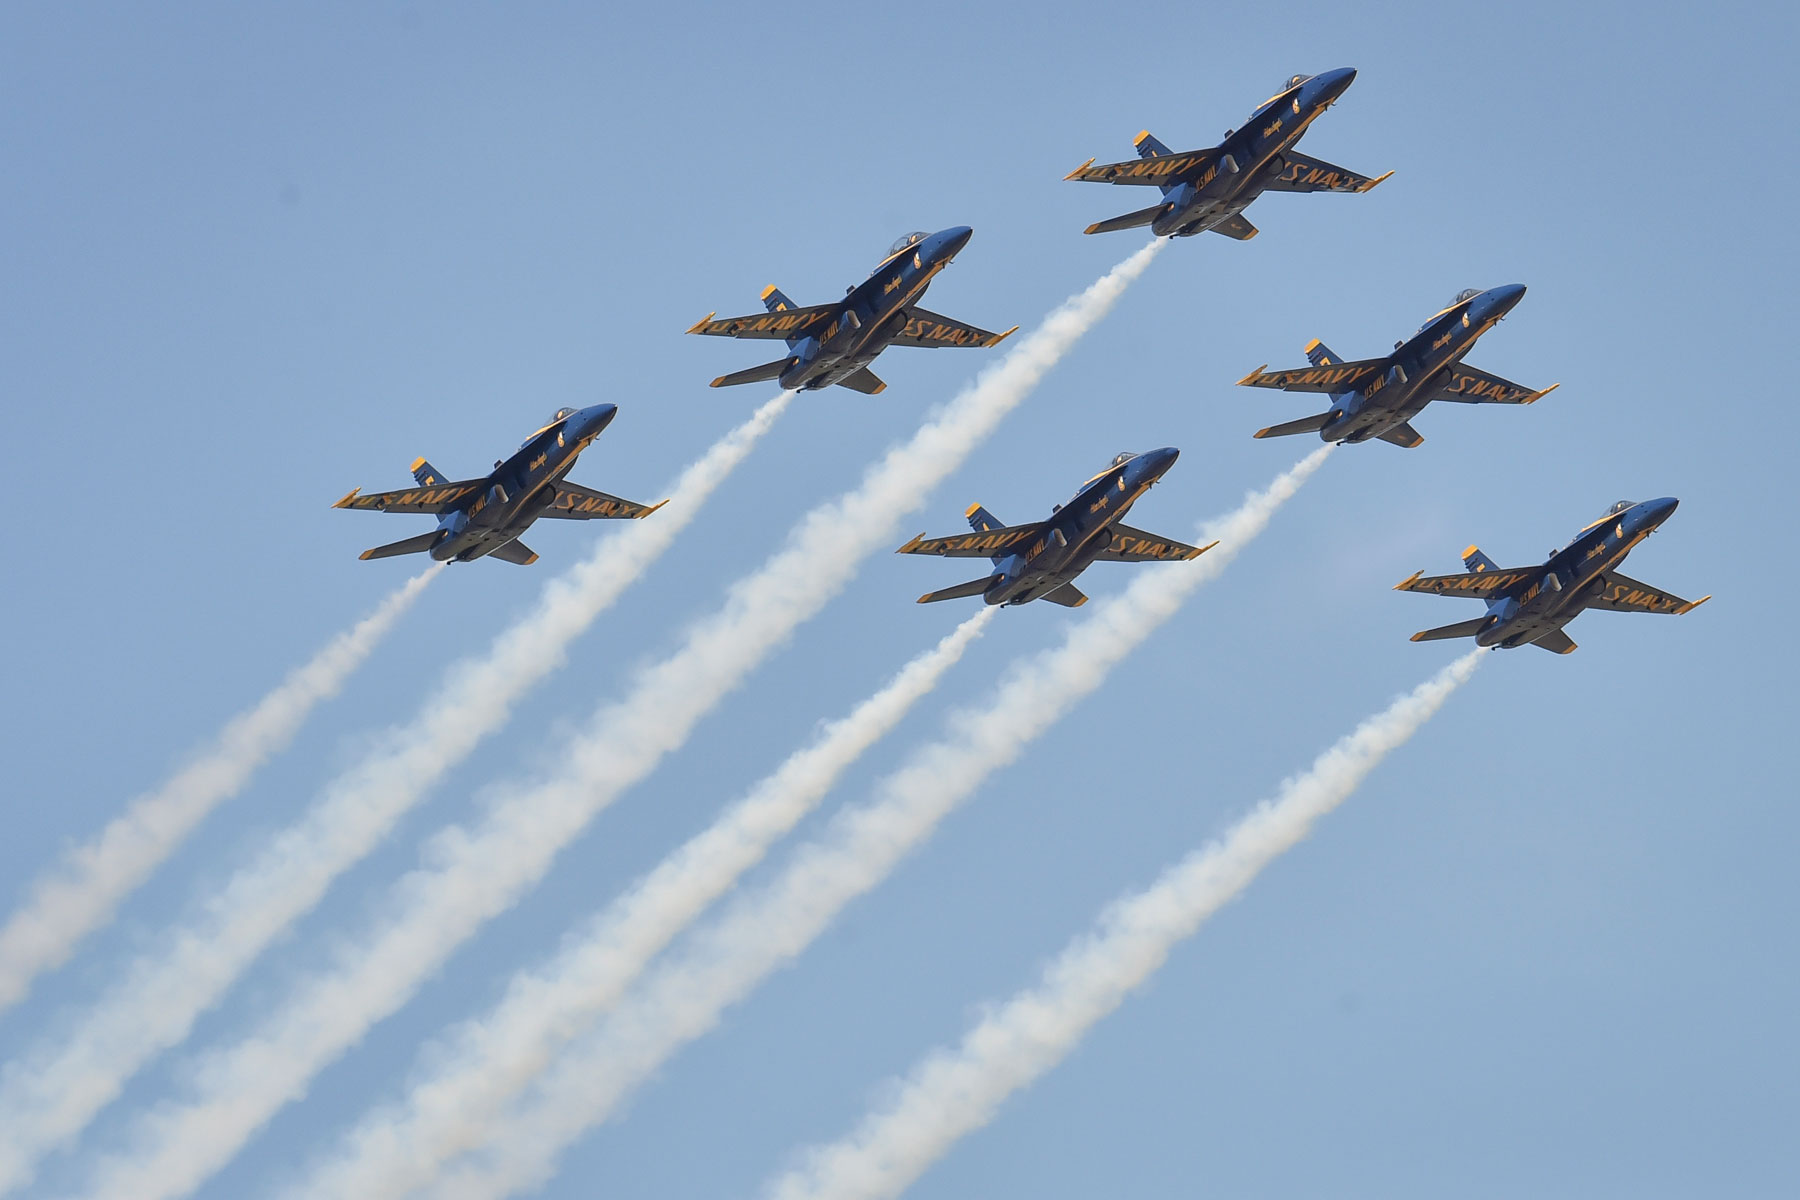 Bird in Engine Causes $1M in Damage to Blue Angels Jet at Air Show ...